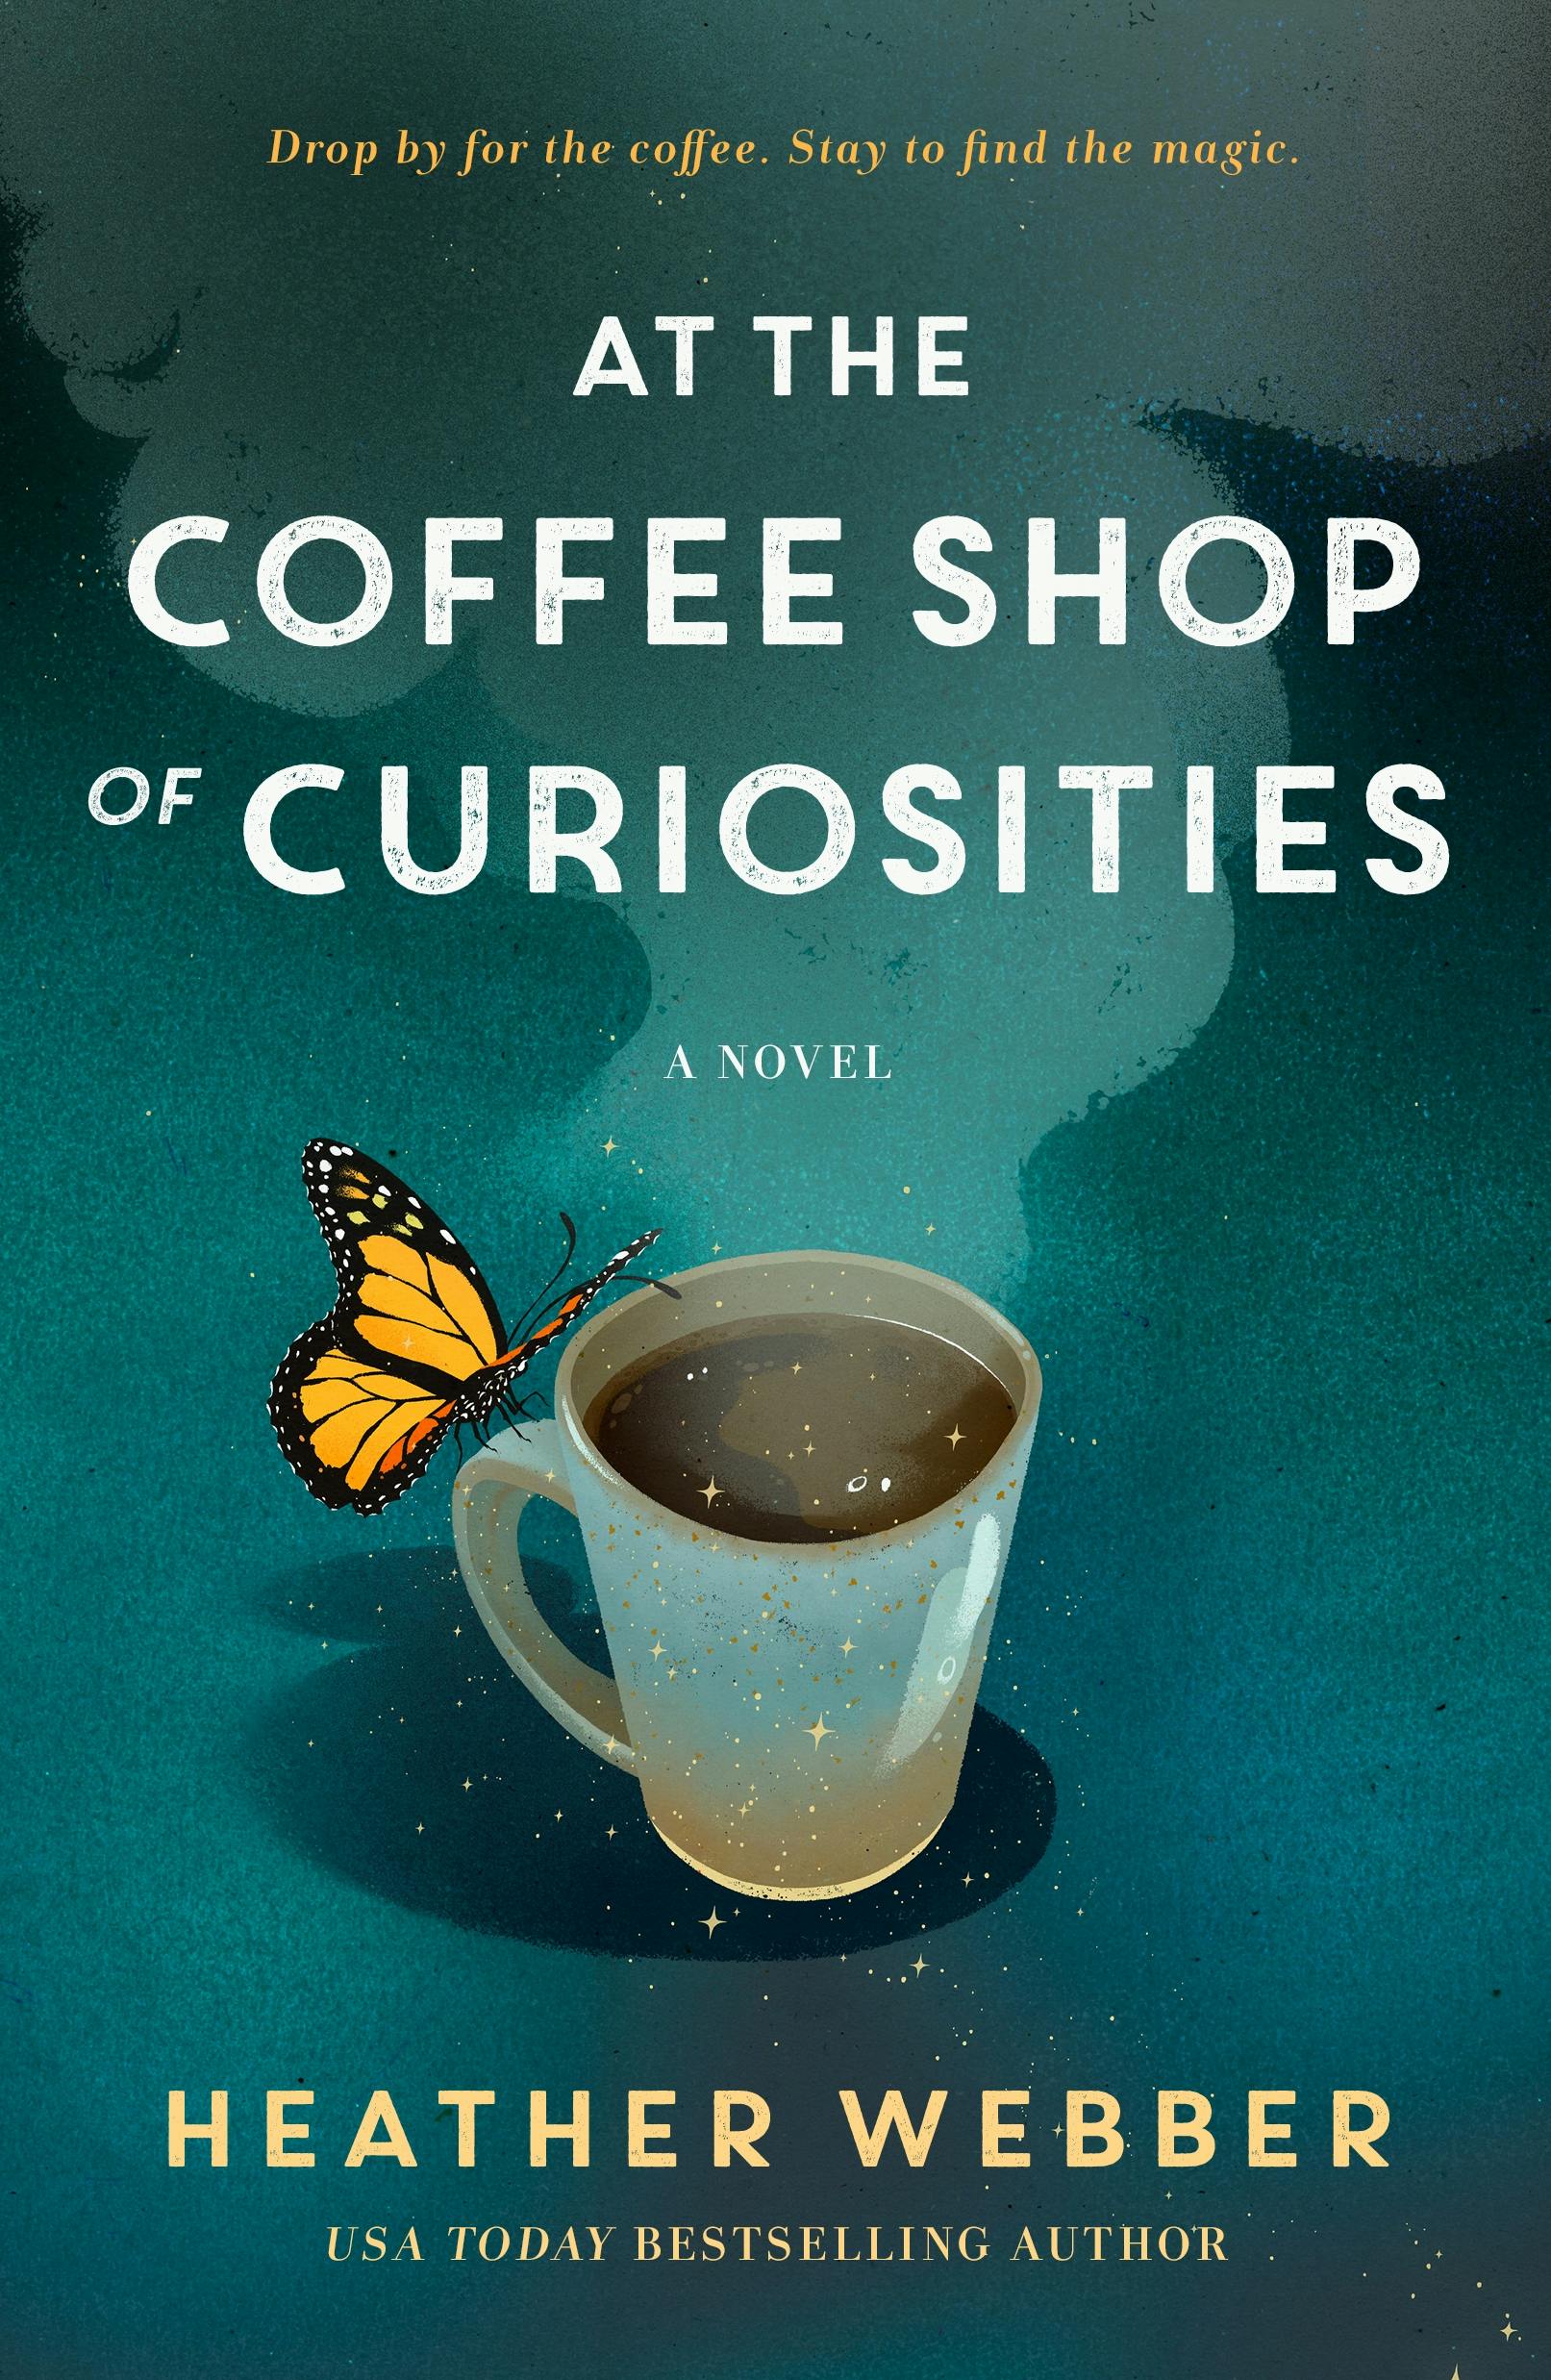 Cover for the book titled as: At the Coffee Shop of Curiosities